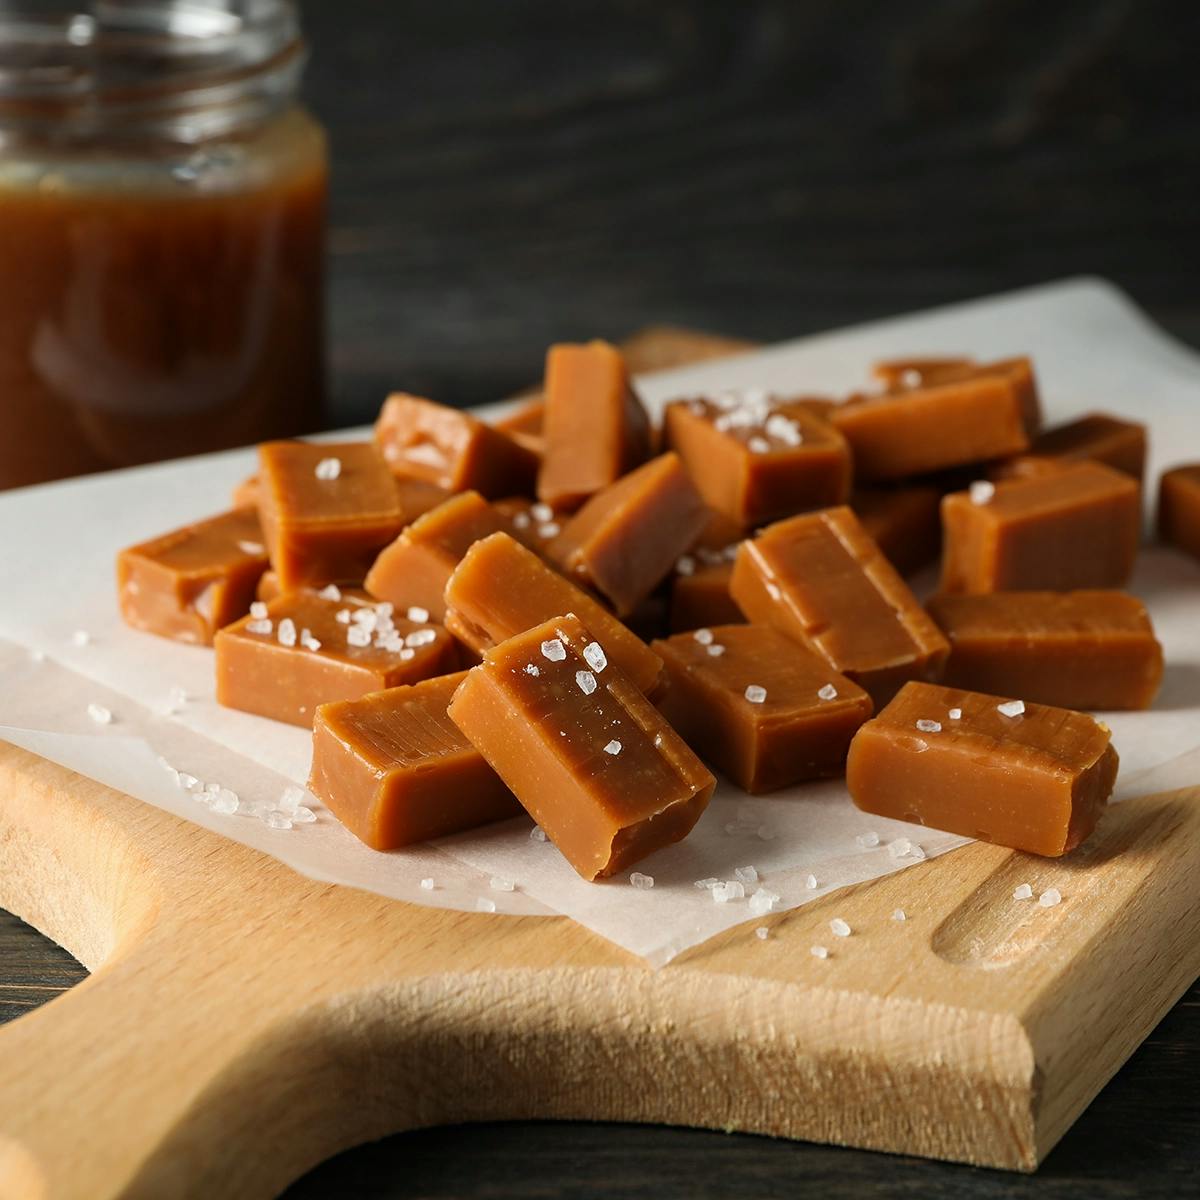 Chocolate fudge topped with caramel